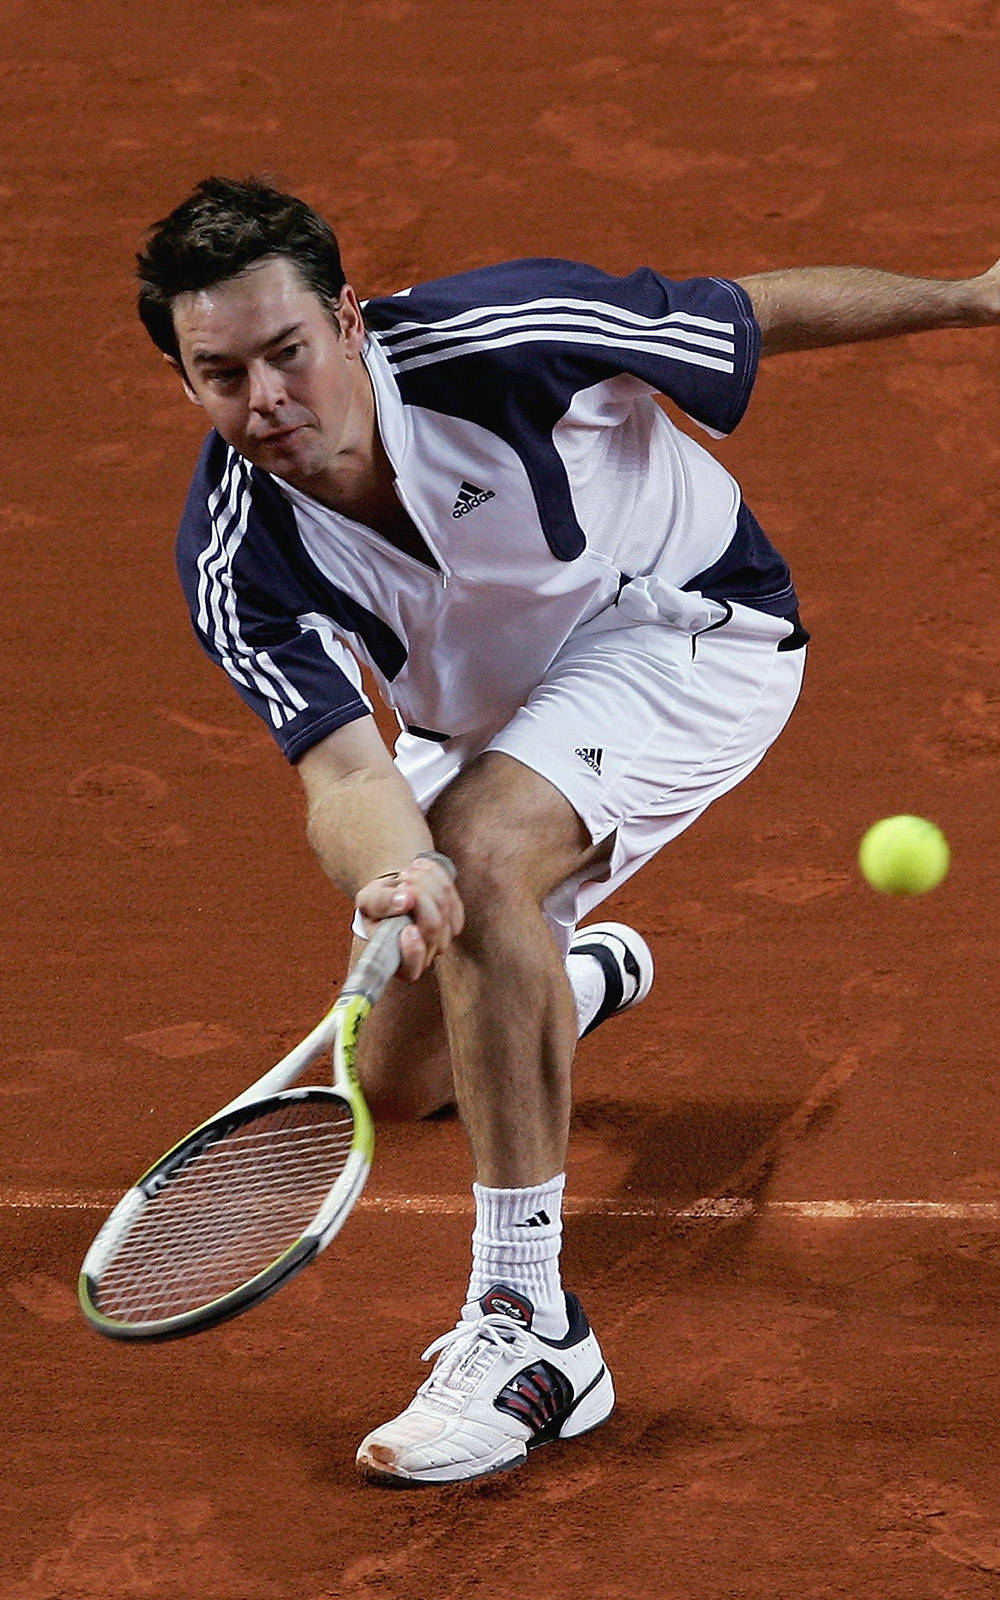 Toddwoodbridge Low Backhand Refers To A Technique Used In Tennis, Where The Player, Todd Woodbridge, Performs A Low Backhand Shot. Wallpaper